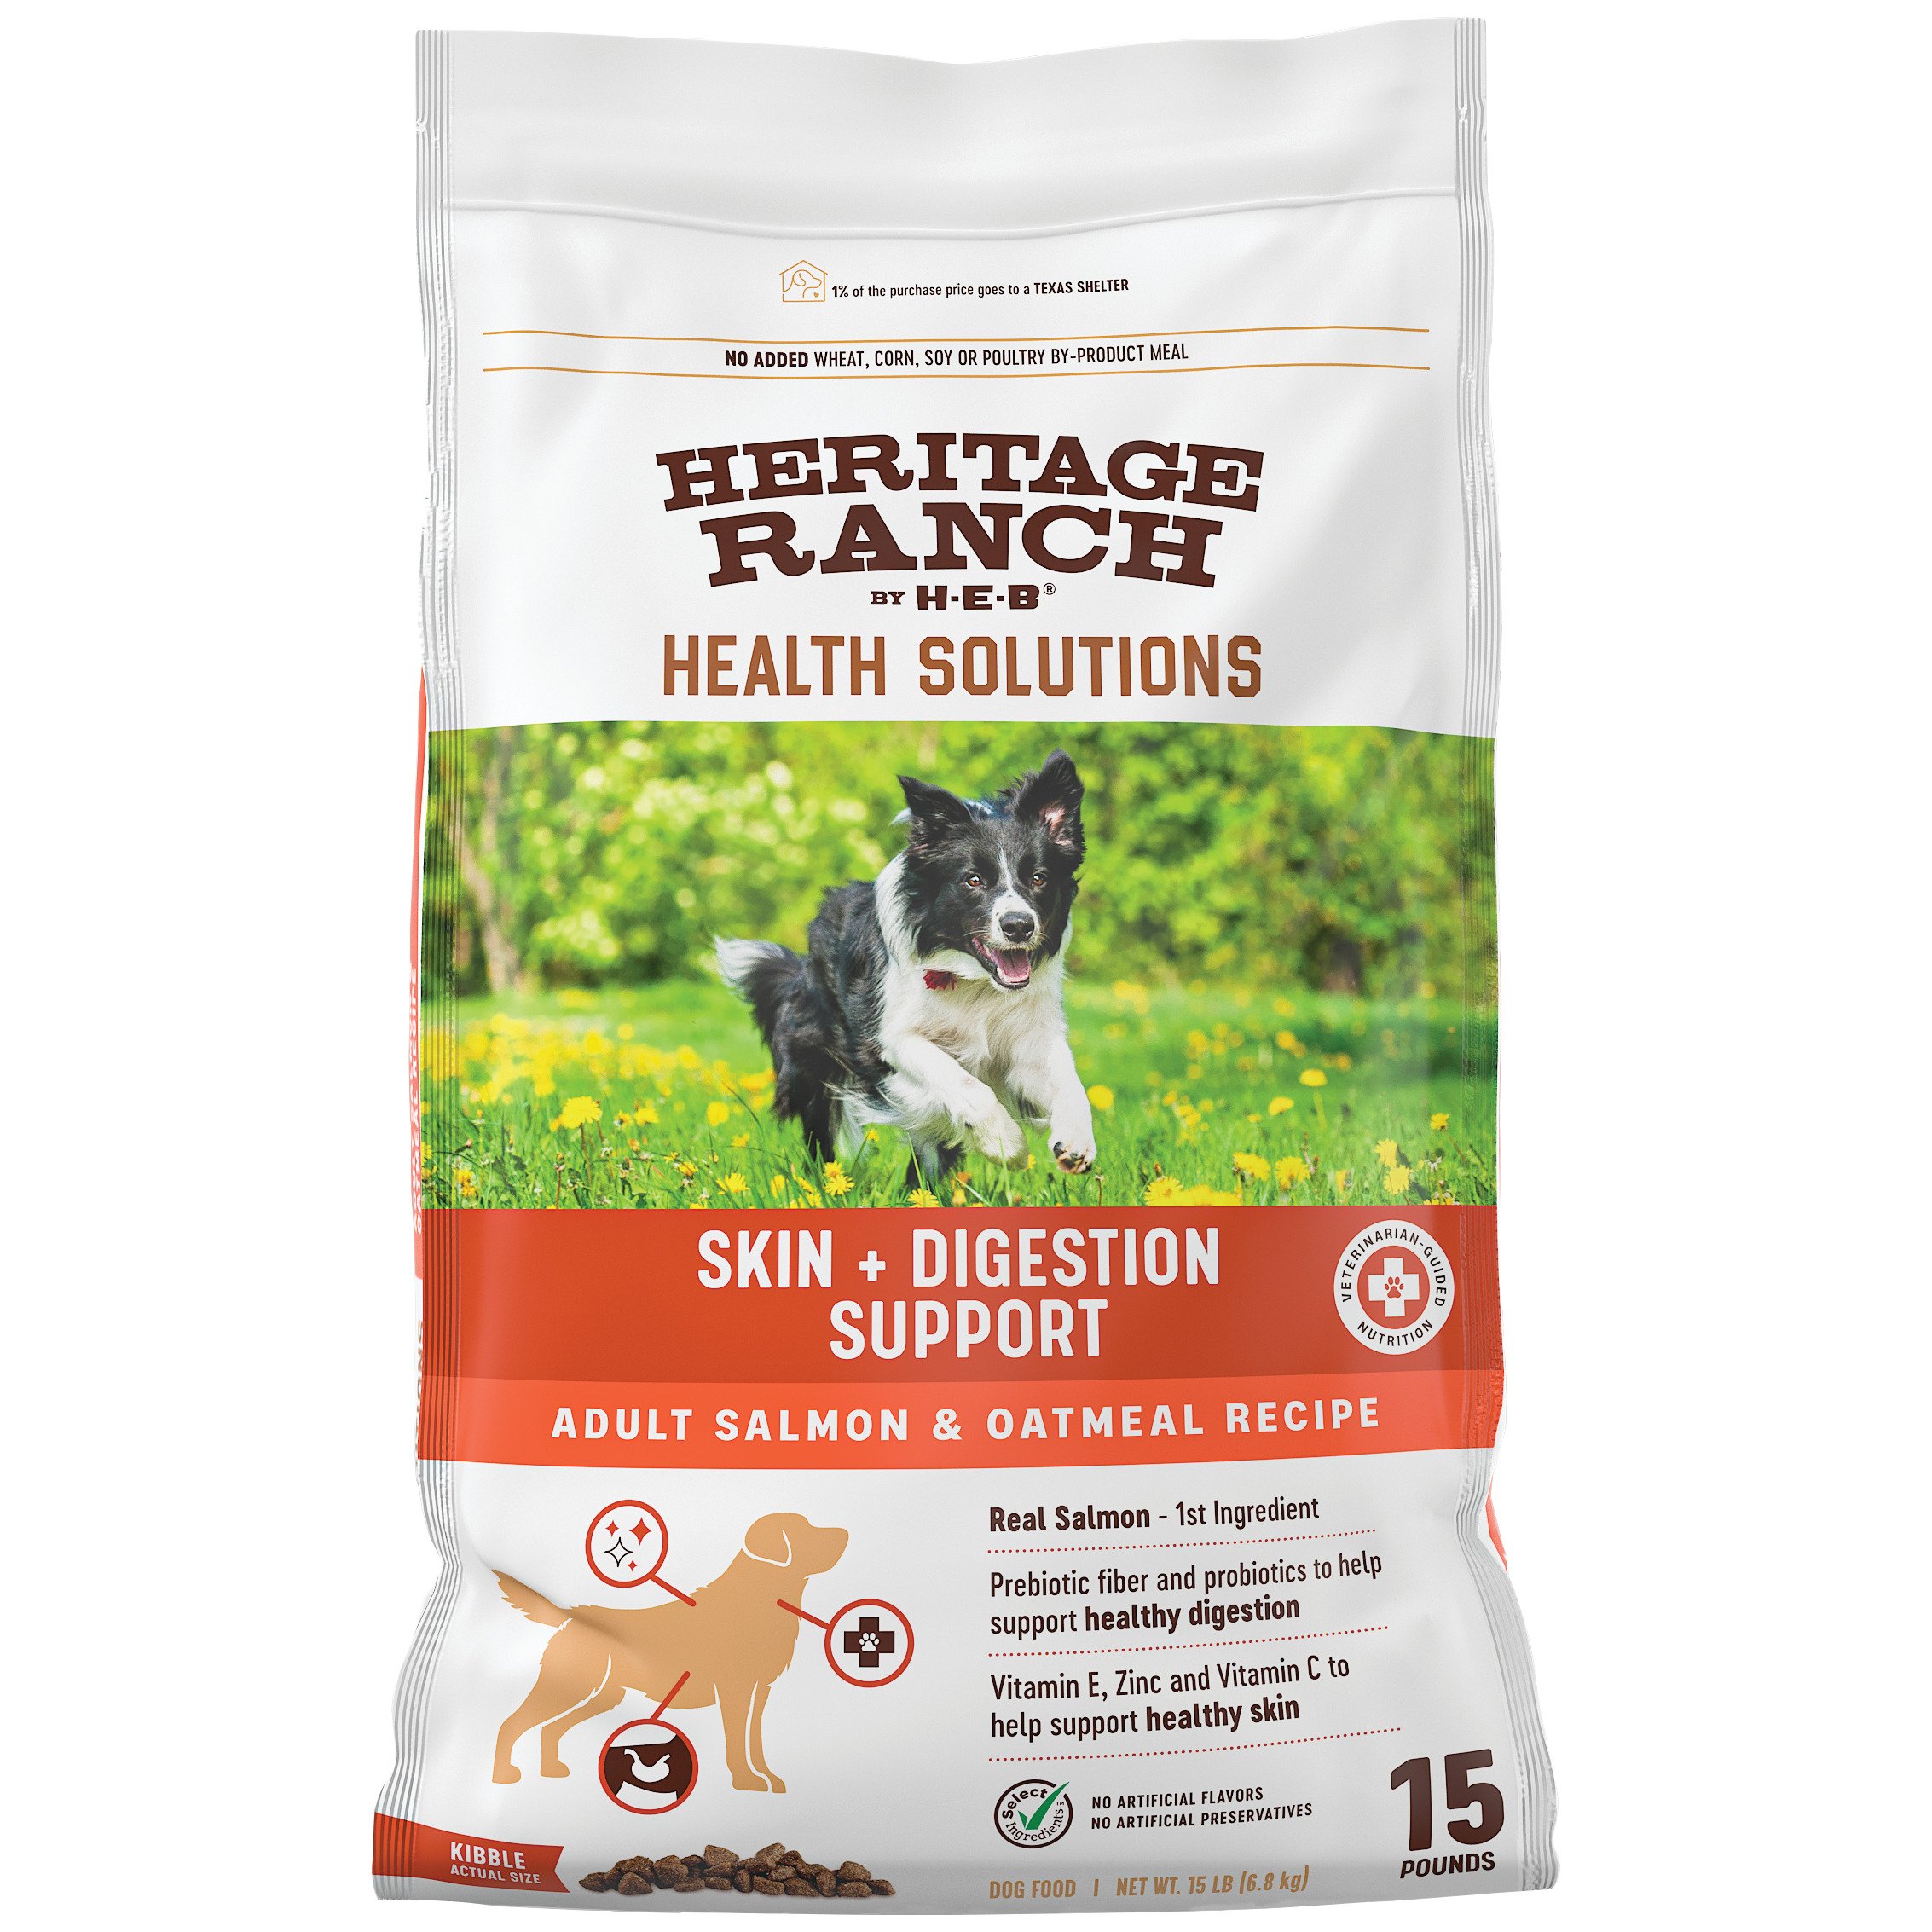 Heritage Ranch By H E B Skin Digestion Support Salmon Oatmeal Recipe Dry Dog Food Shop Dogs At H E B